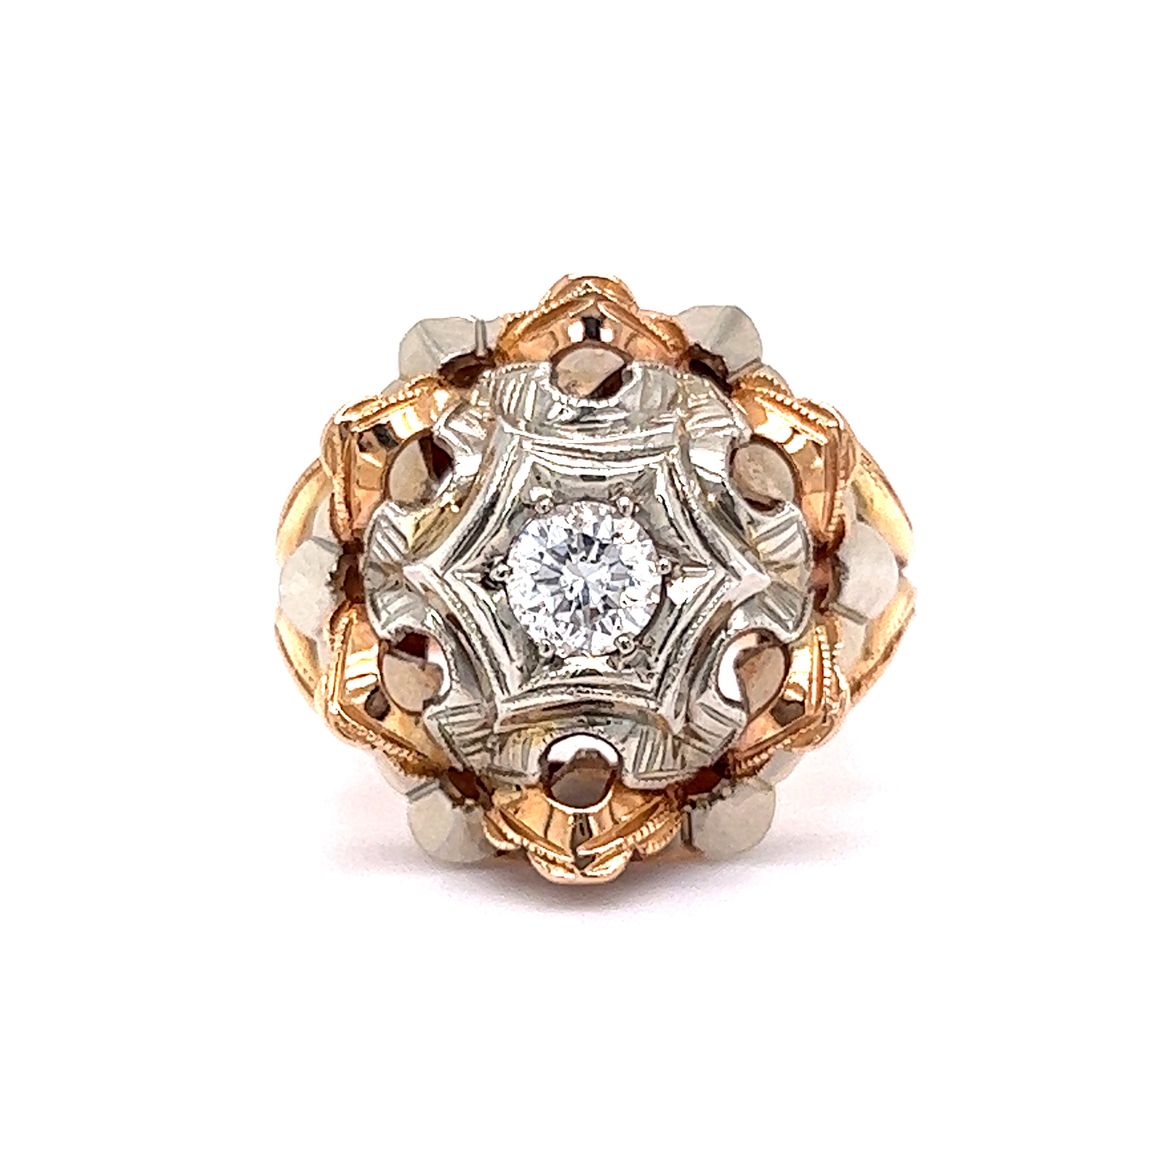 Vintage Cocktail Ring .40 Round Brilliant Cut Diamond in 18K White & Rose Gold